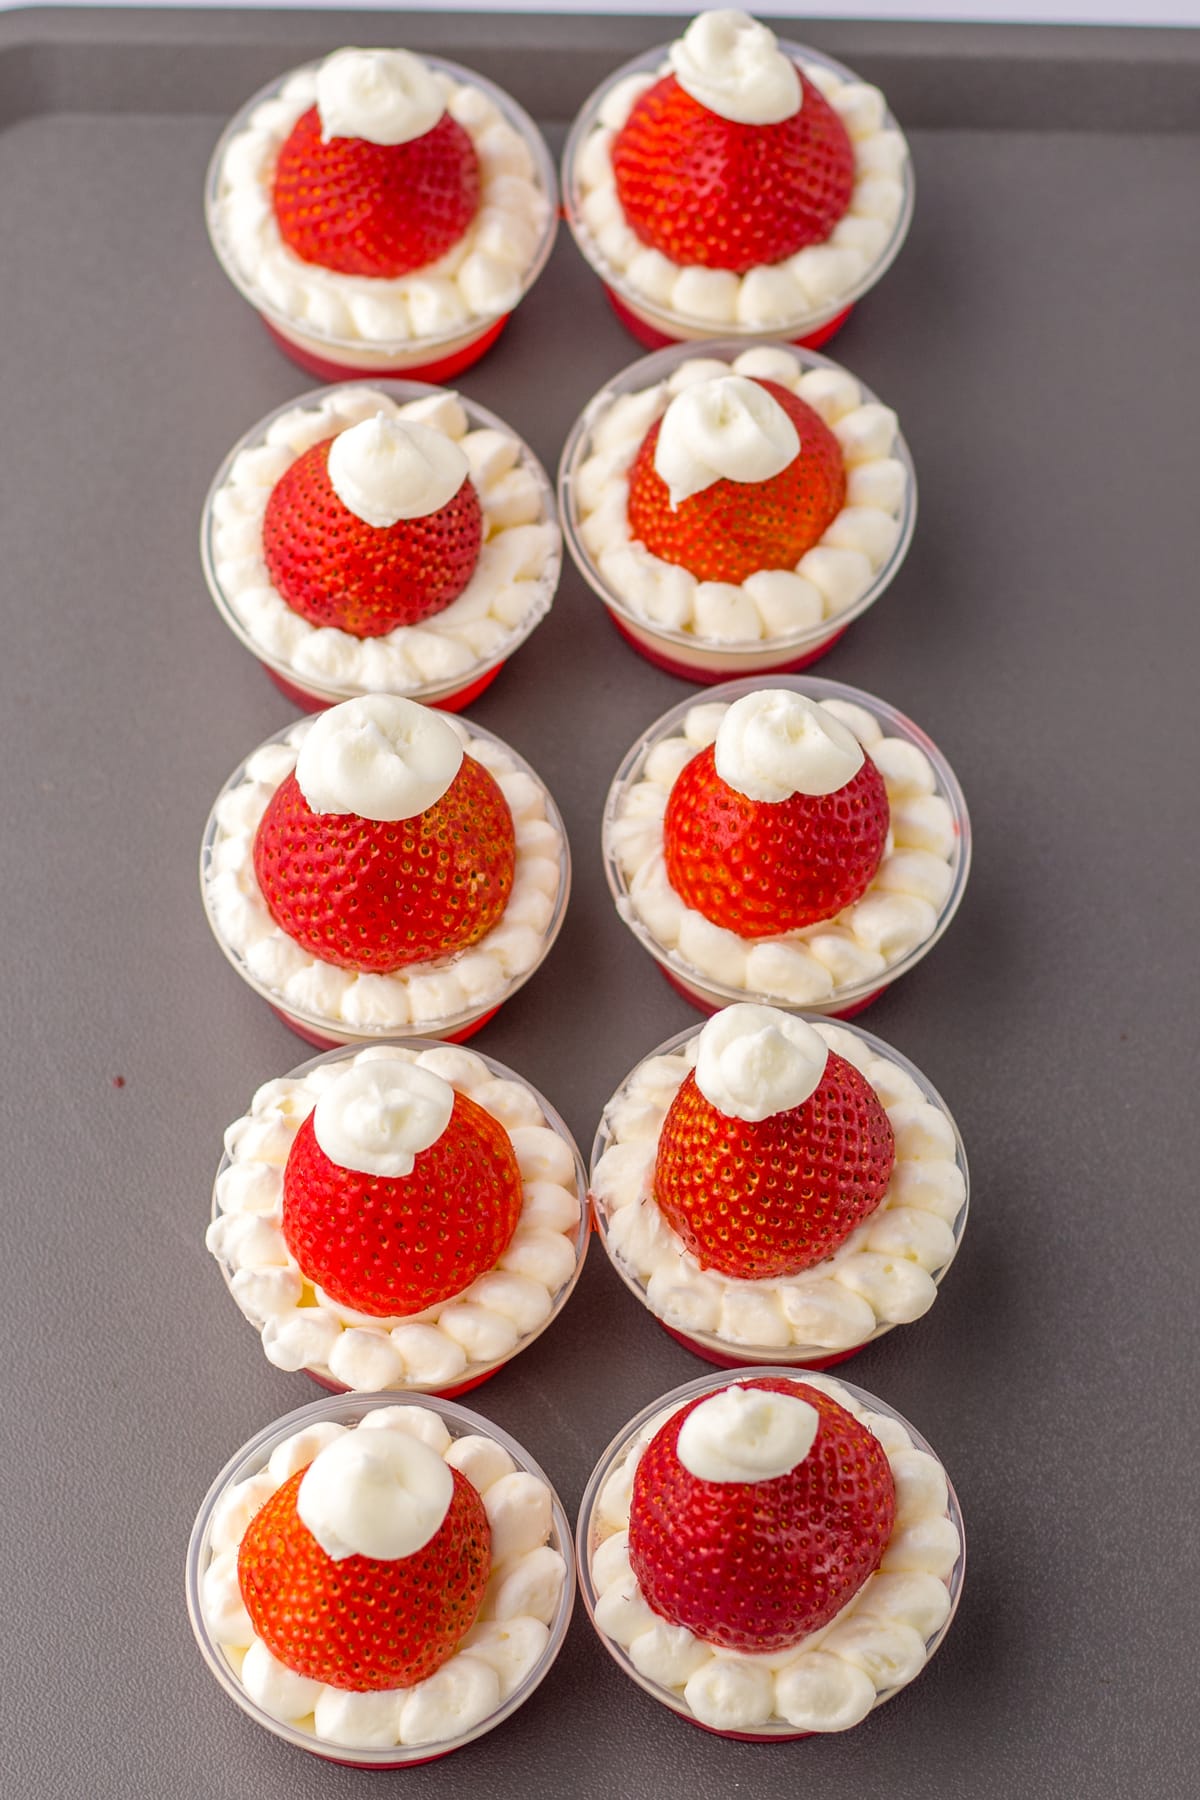 The last step in Santa Hat Jello Shots is to add strawberries to it.